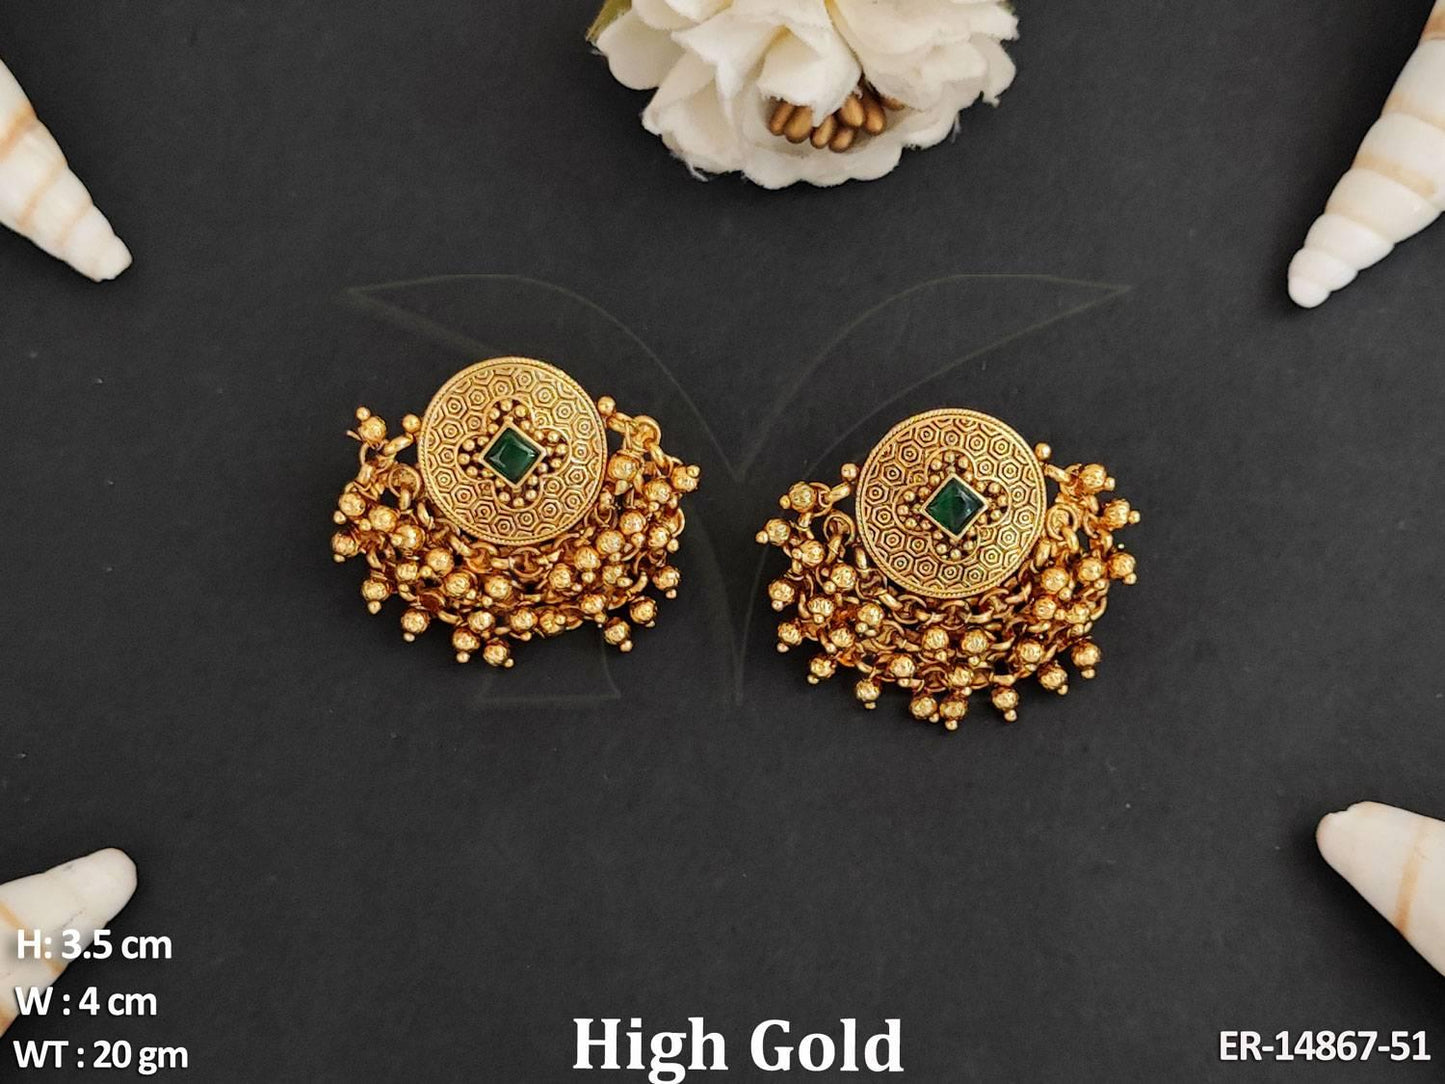 Elevate your style with our Antique Jewellery designer earrings. Made from brass or copper metal,